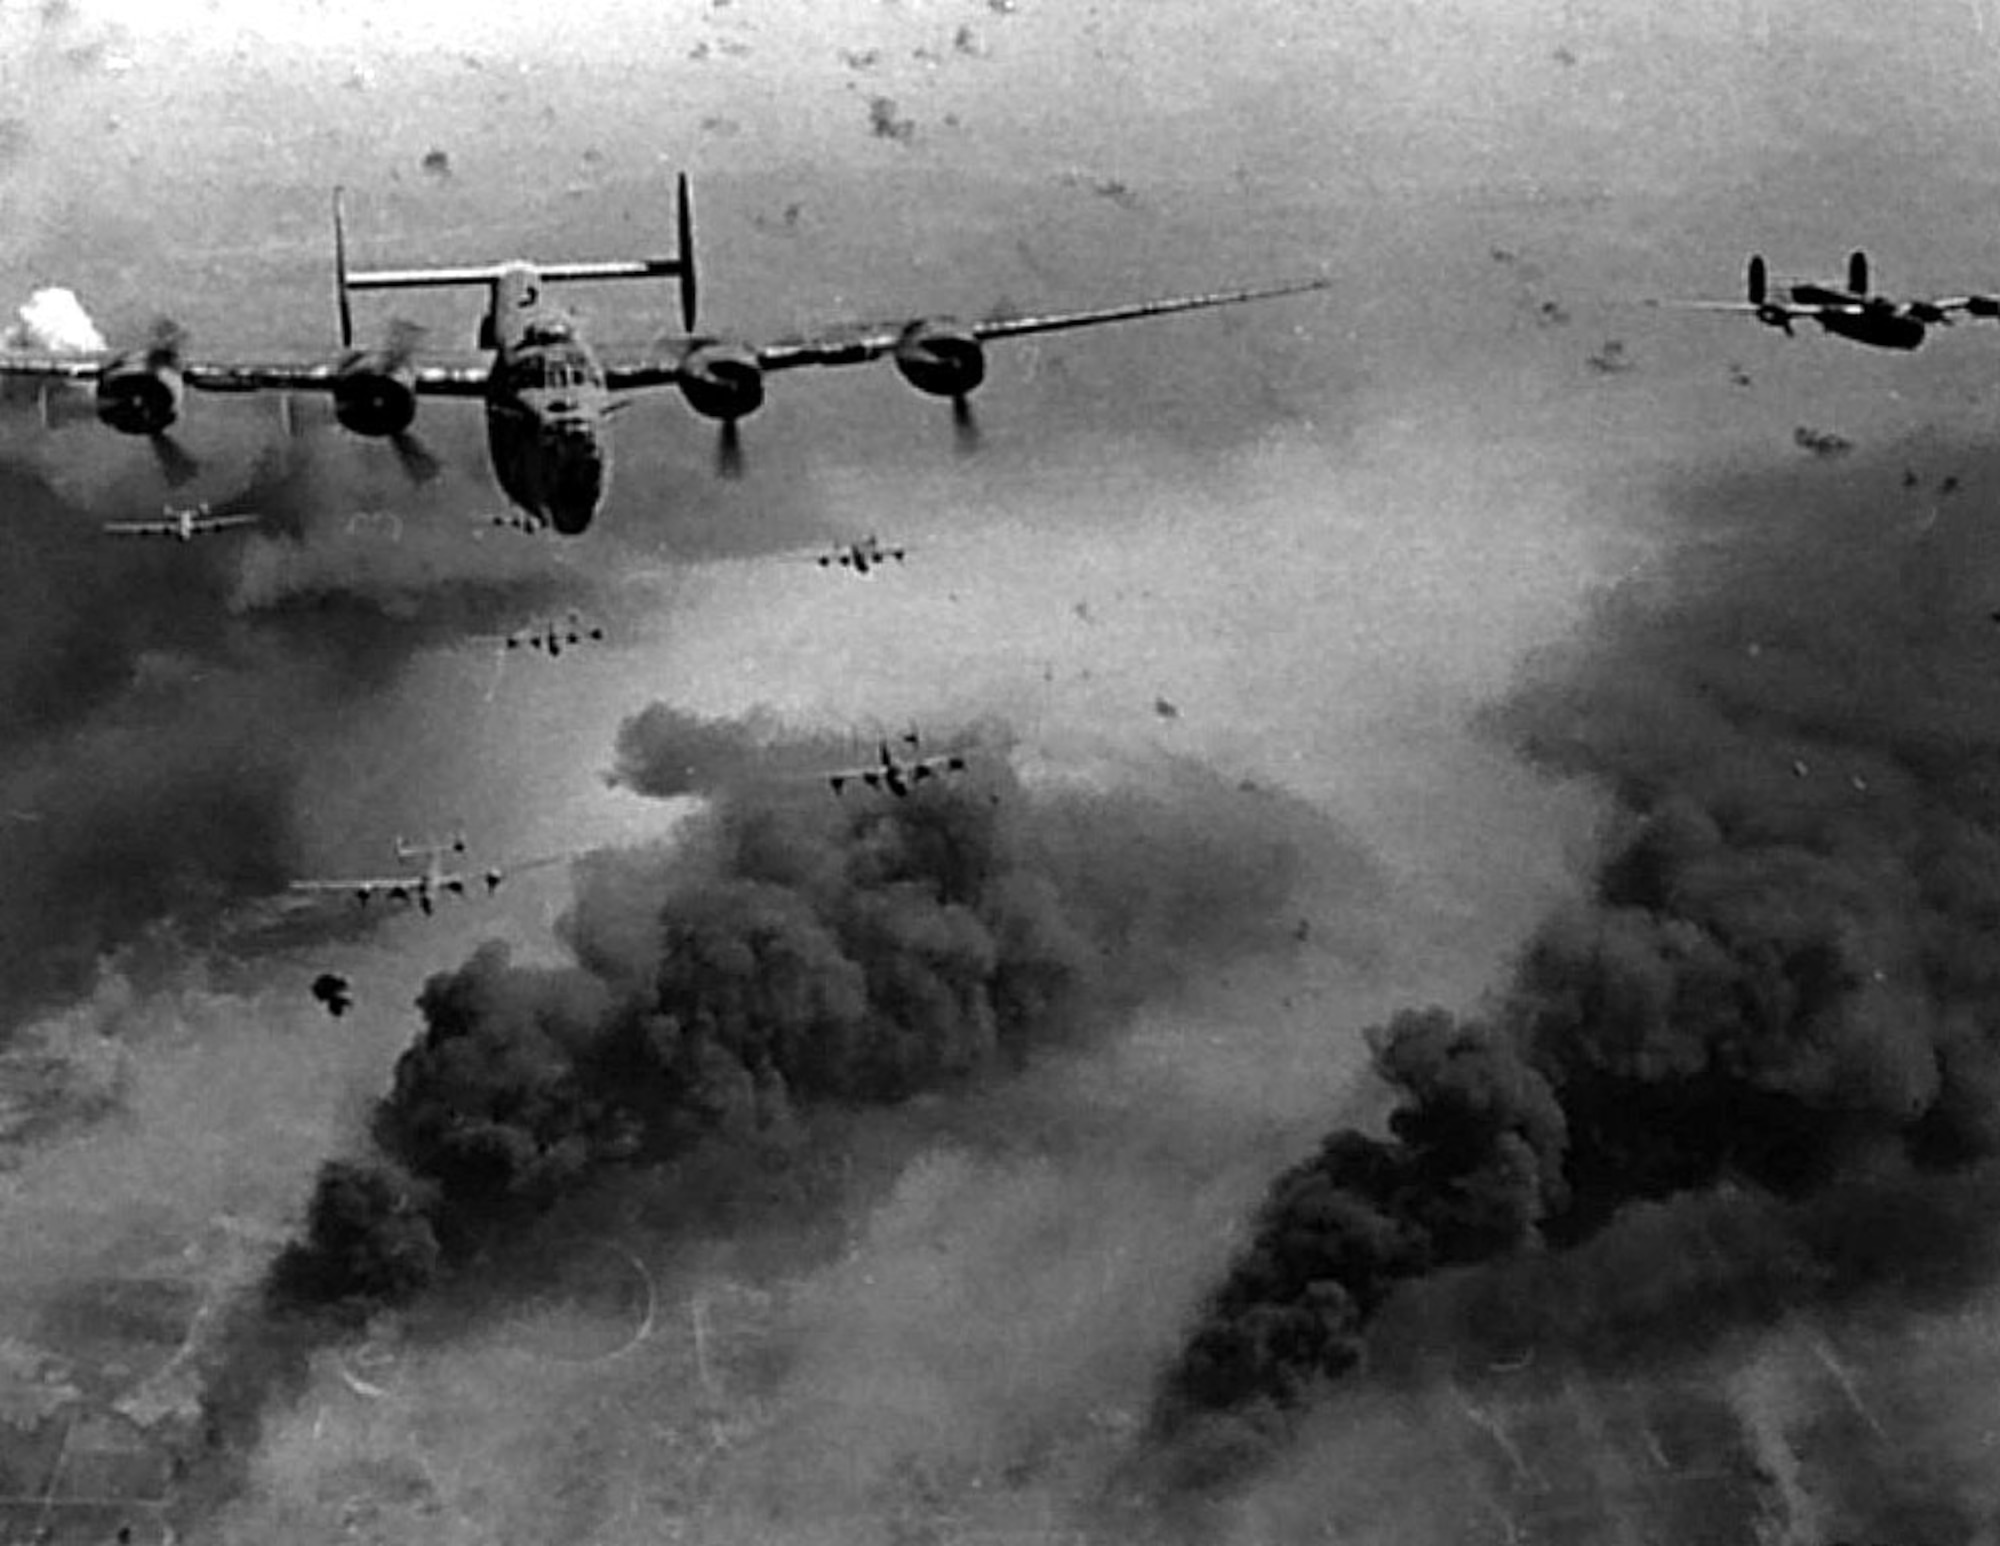 A formation of B-24 Liberators conduct a bombing mission over occupied Europe during World War II.  (U.S. Air Force photo)